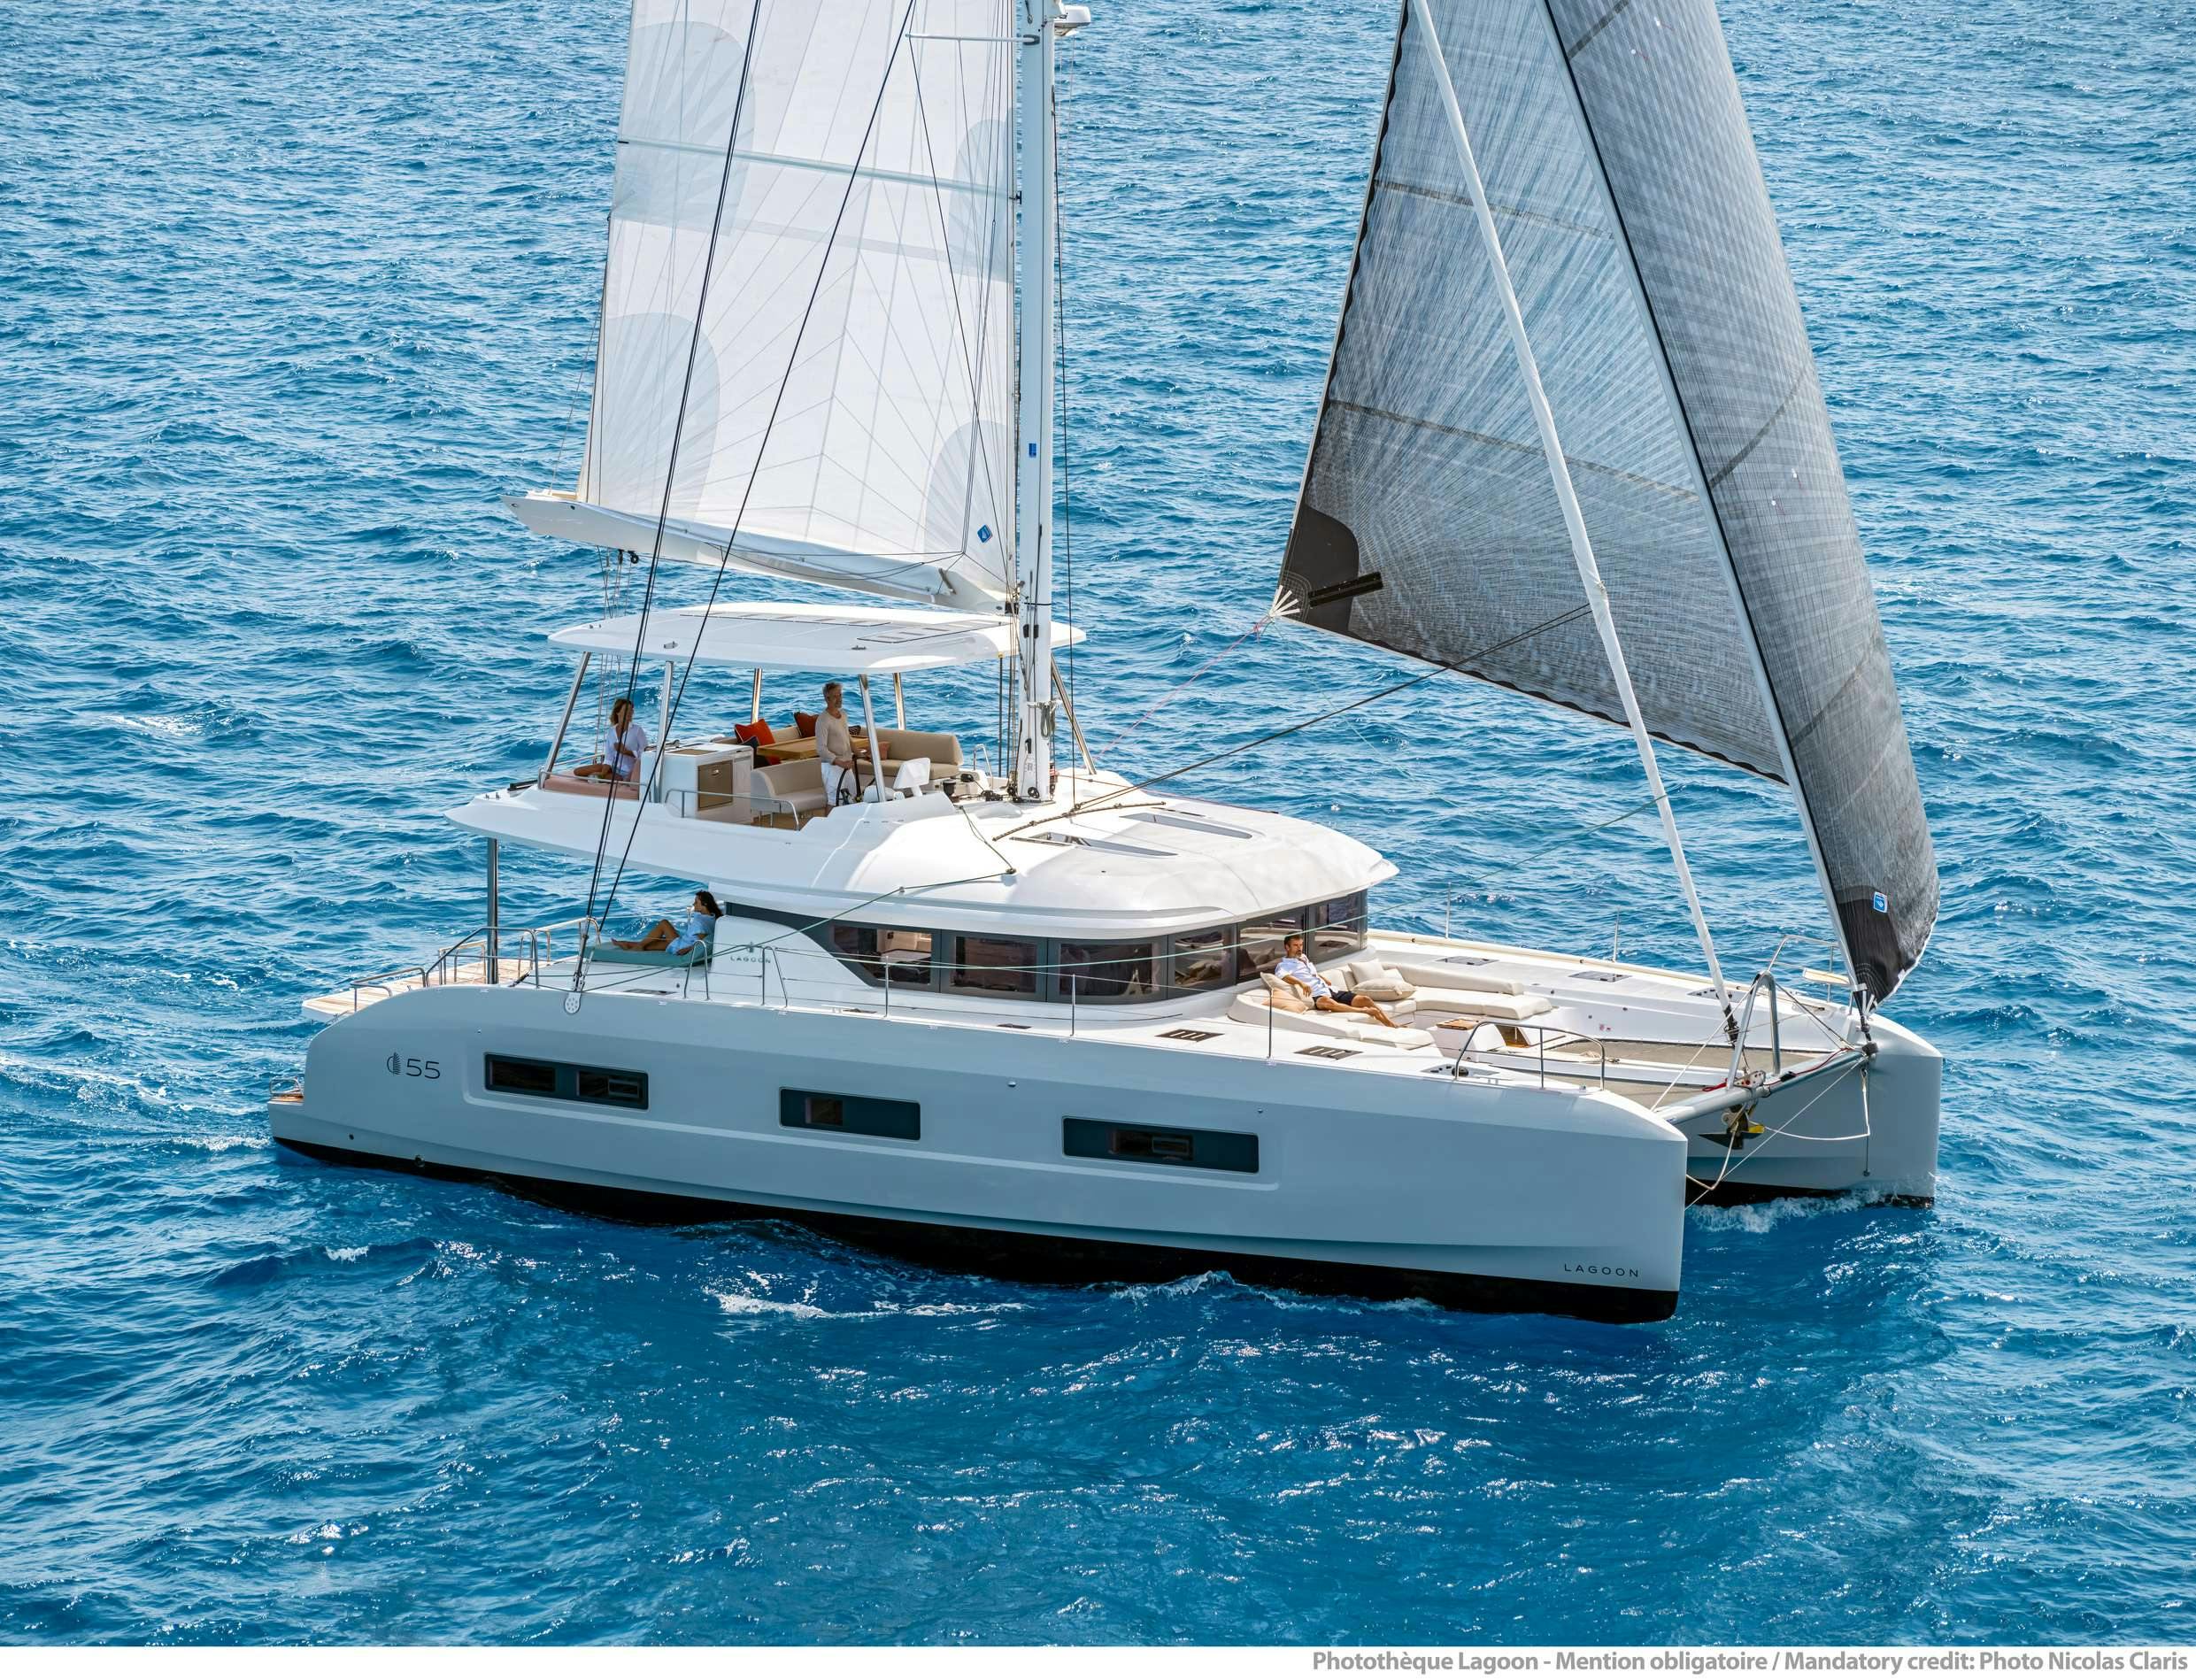 VALIUM 55 - Yacht Charter Paros & Boat hire in Greece 1